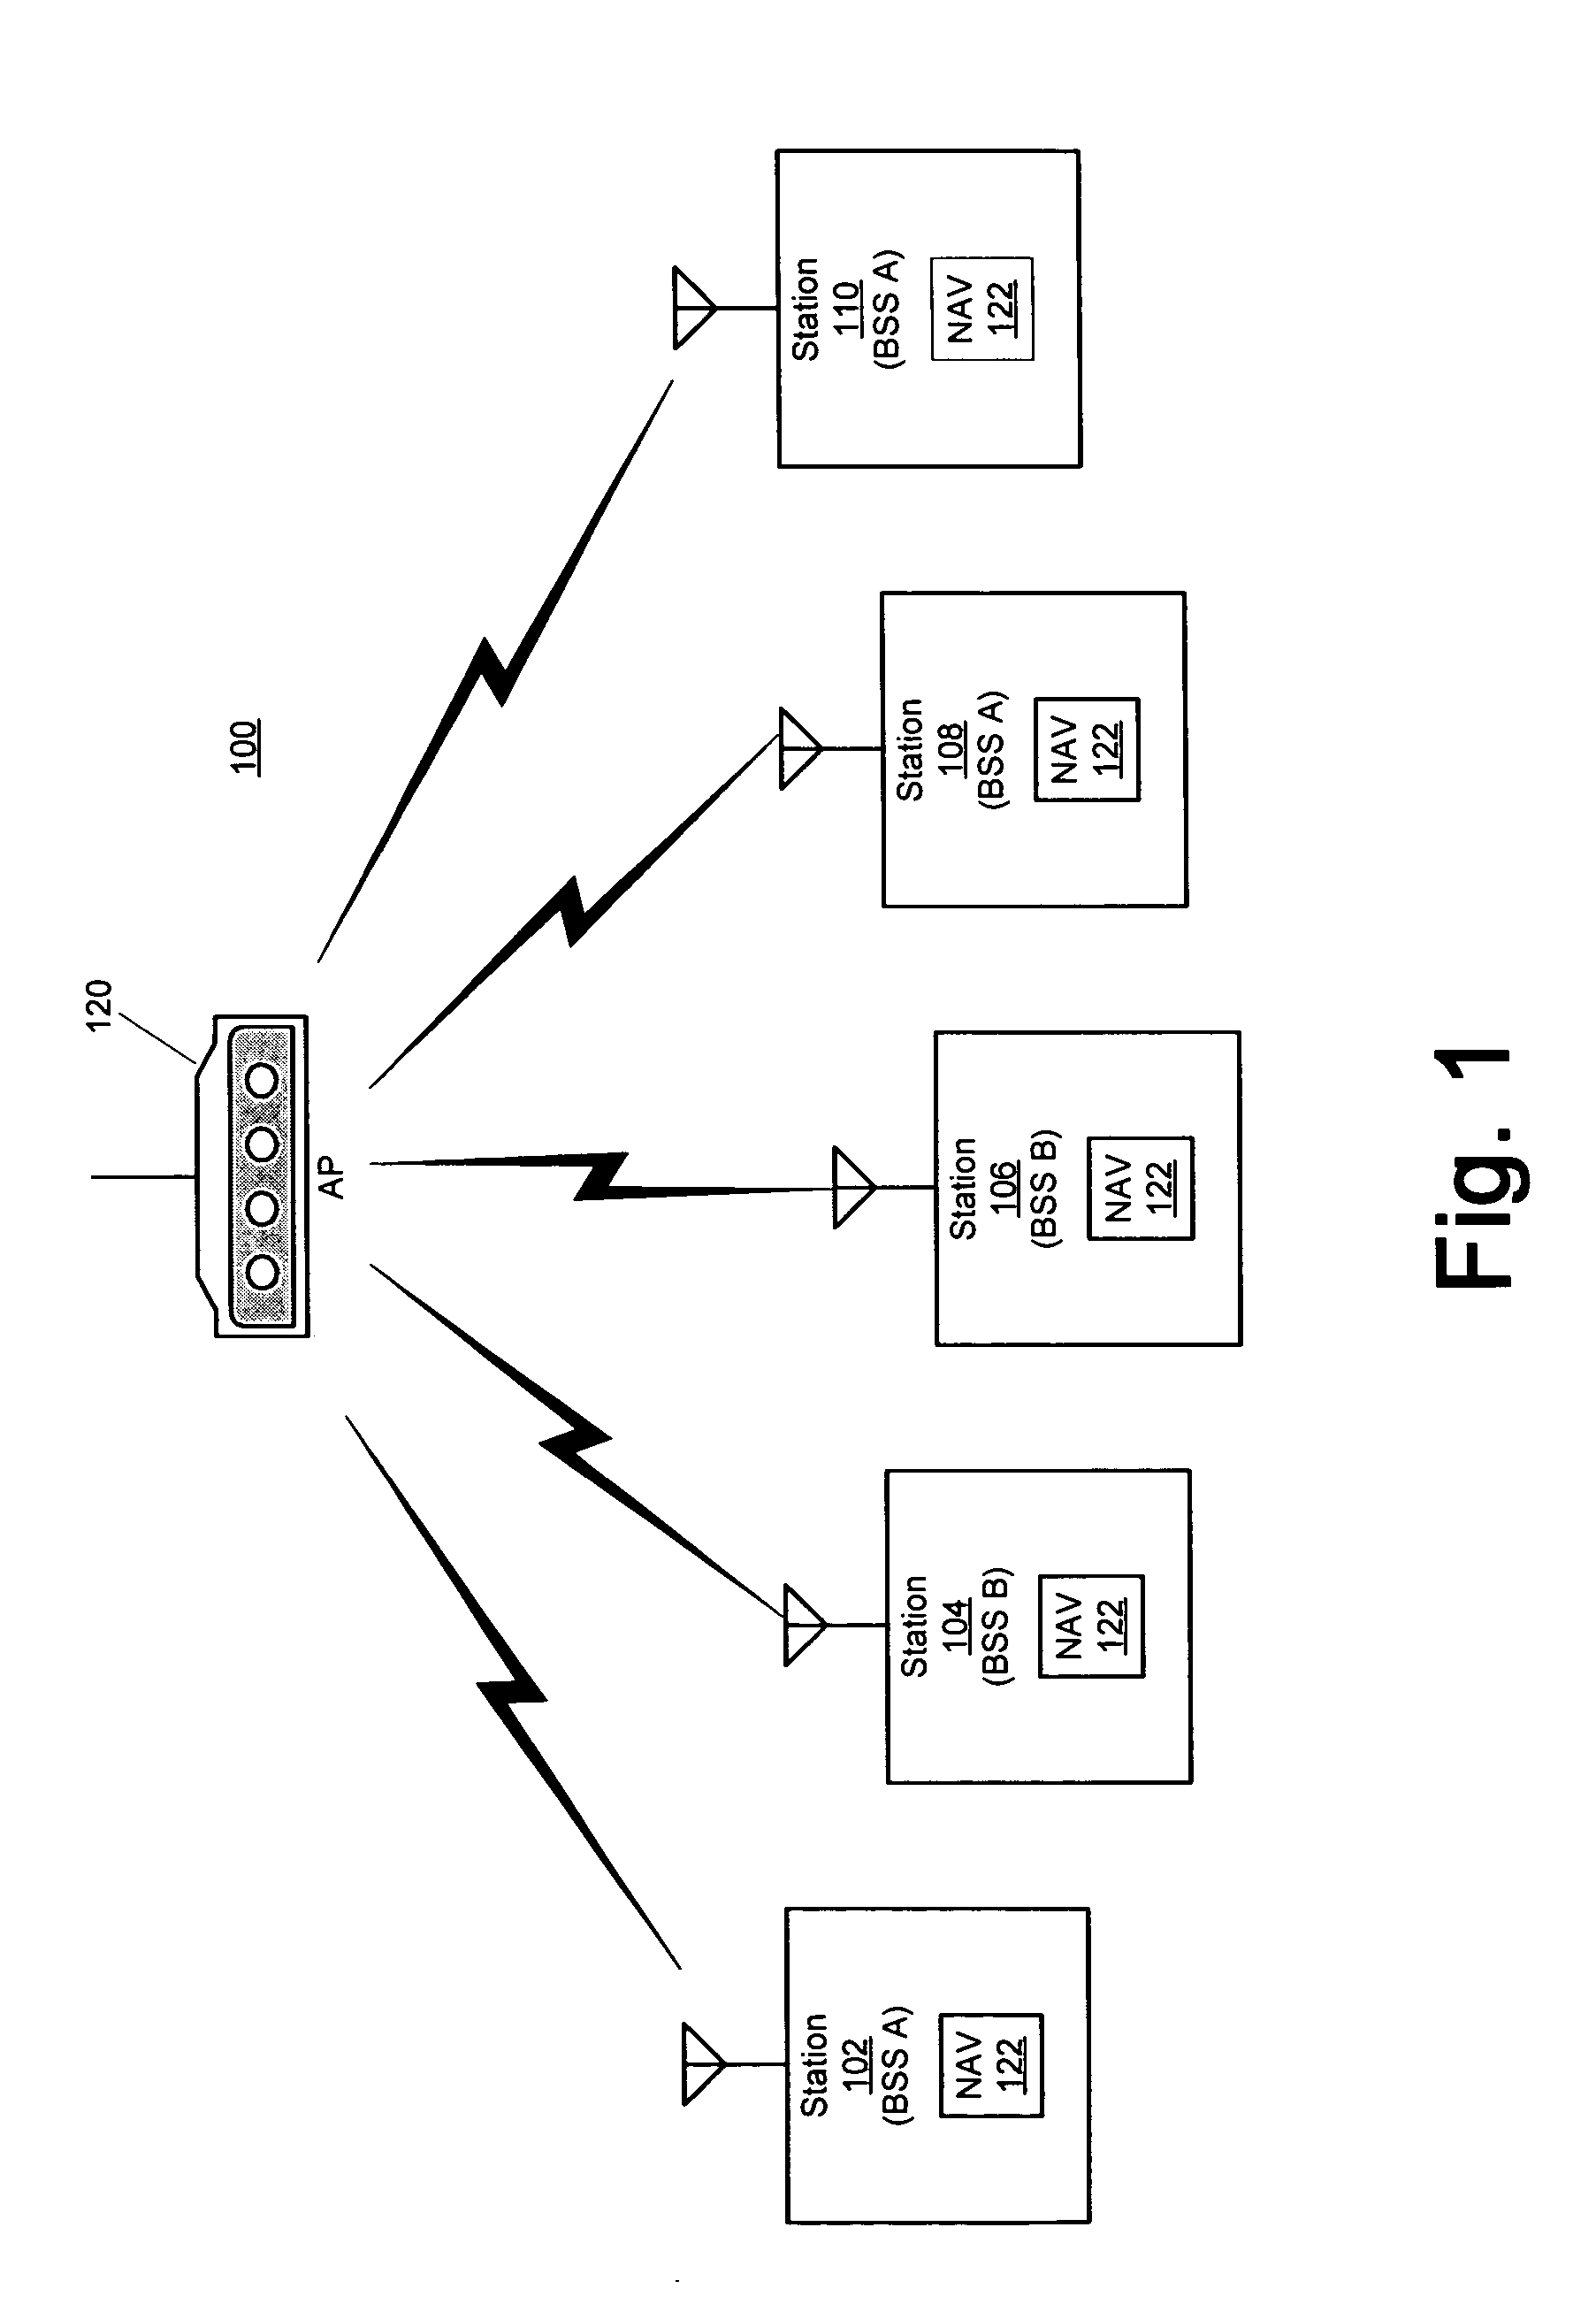 Wireless access point simultaneously supporting basic service sets on multiple channels